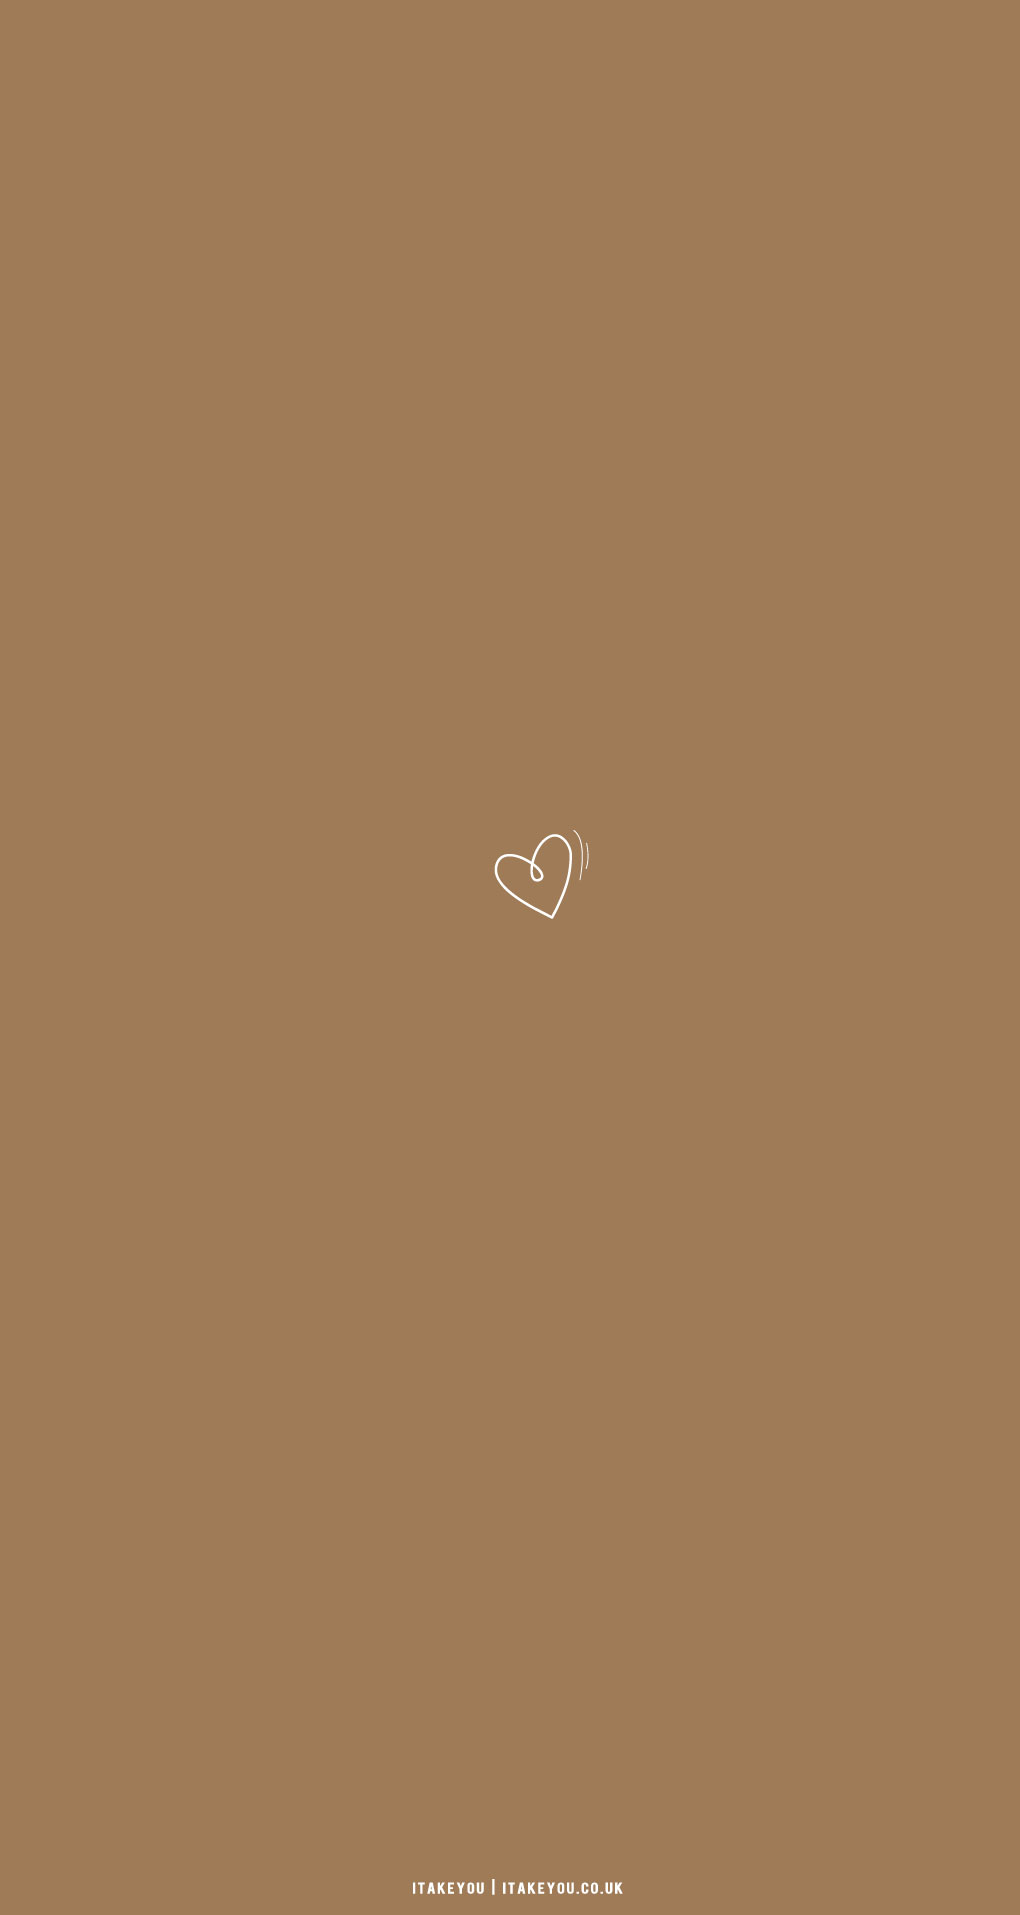 30 Cute Brown Aesthetic Wallpapers for Phone : Heart Shakes I Take You |  Wedding Readings | Wedding Ideas | Wedding Dresses | Wedding Theme